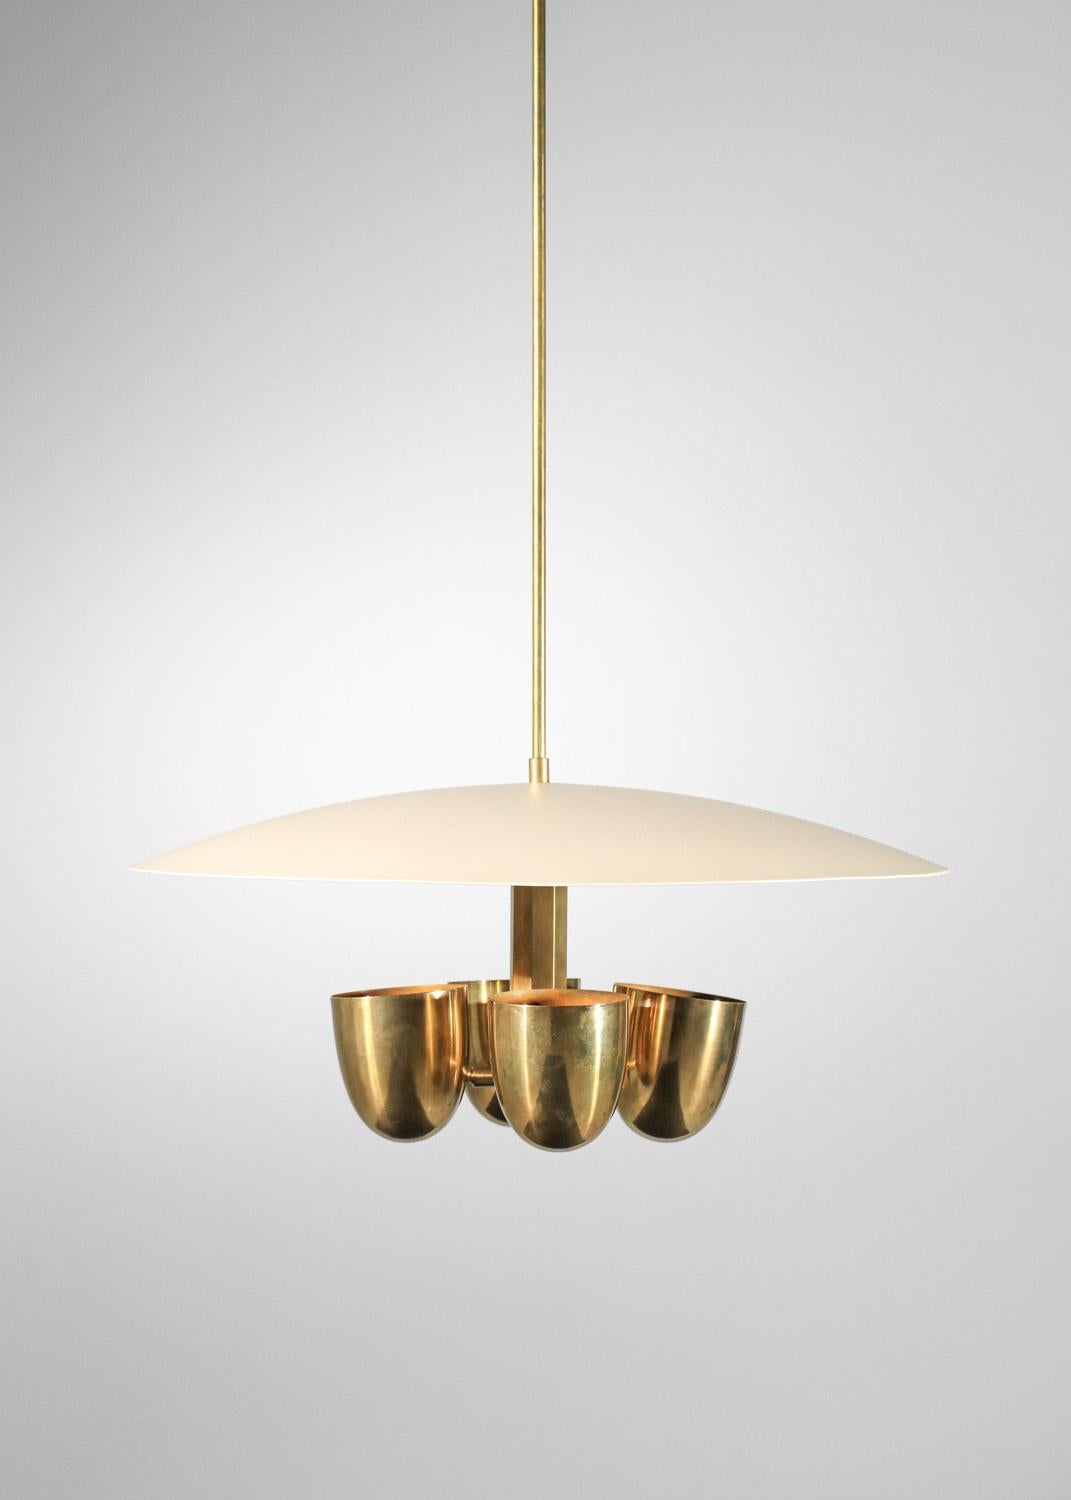 This modern chandelier is composed of an off-white lacquered metal dome and four bell shades in patinated solid brass. The lower central hexagonal bar is also made of solid brass. We recommend four E14 type LED bulbs for this chandelier. Possibility